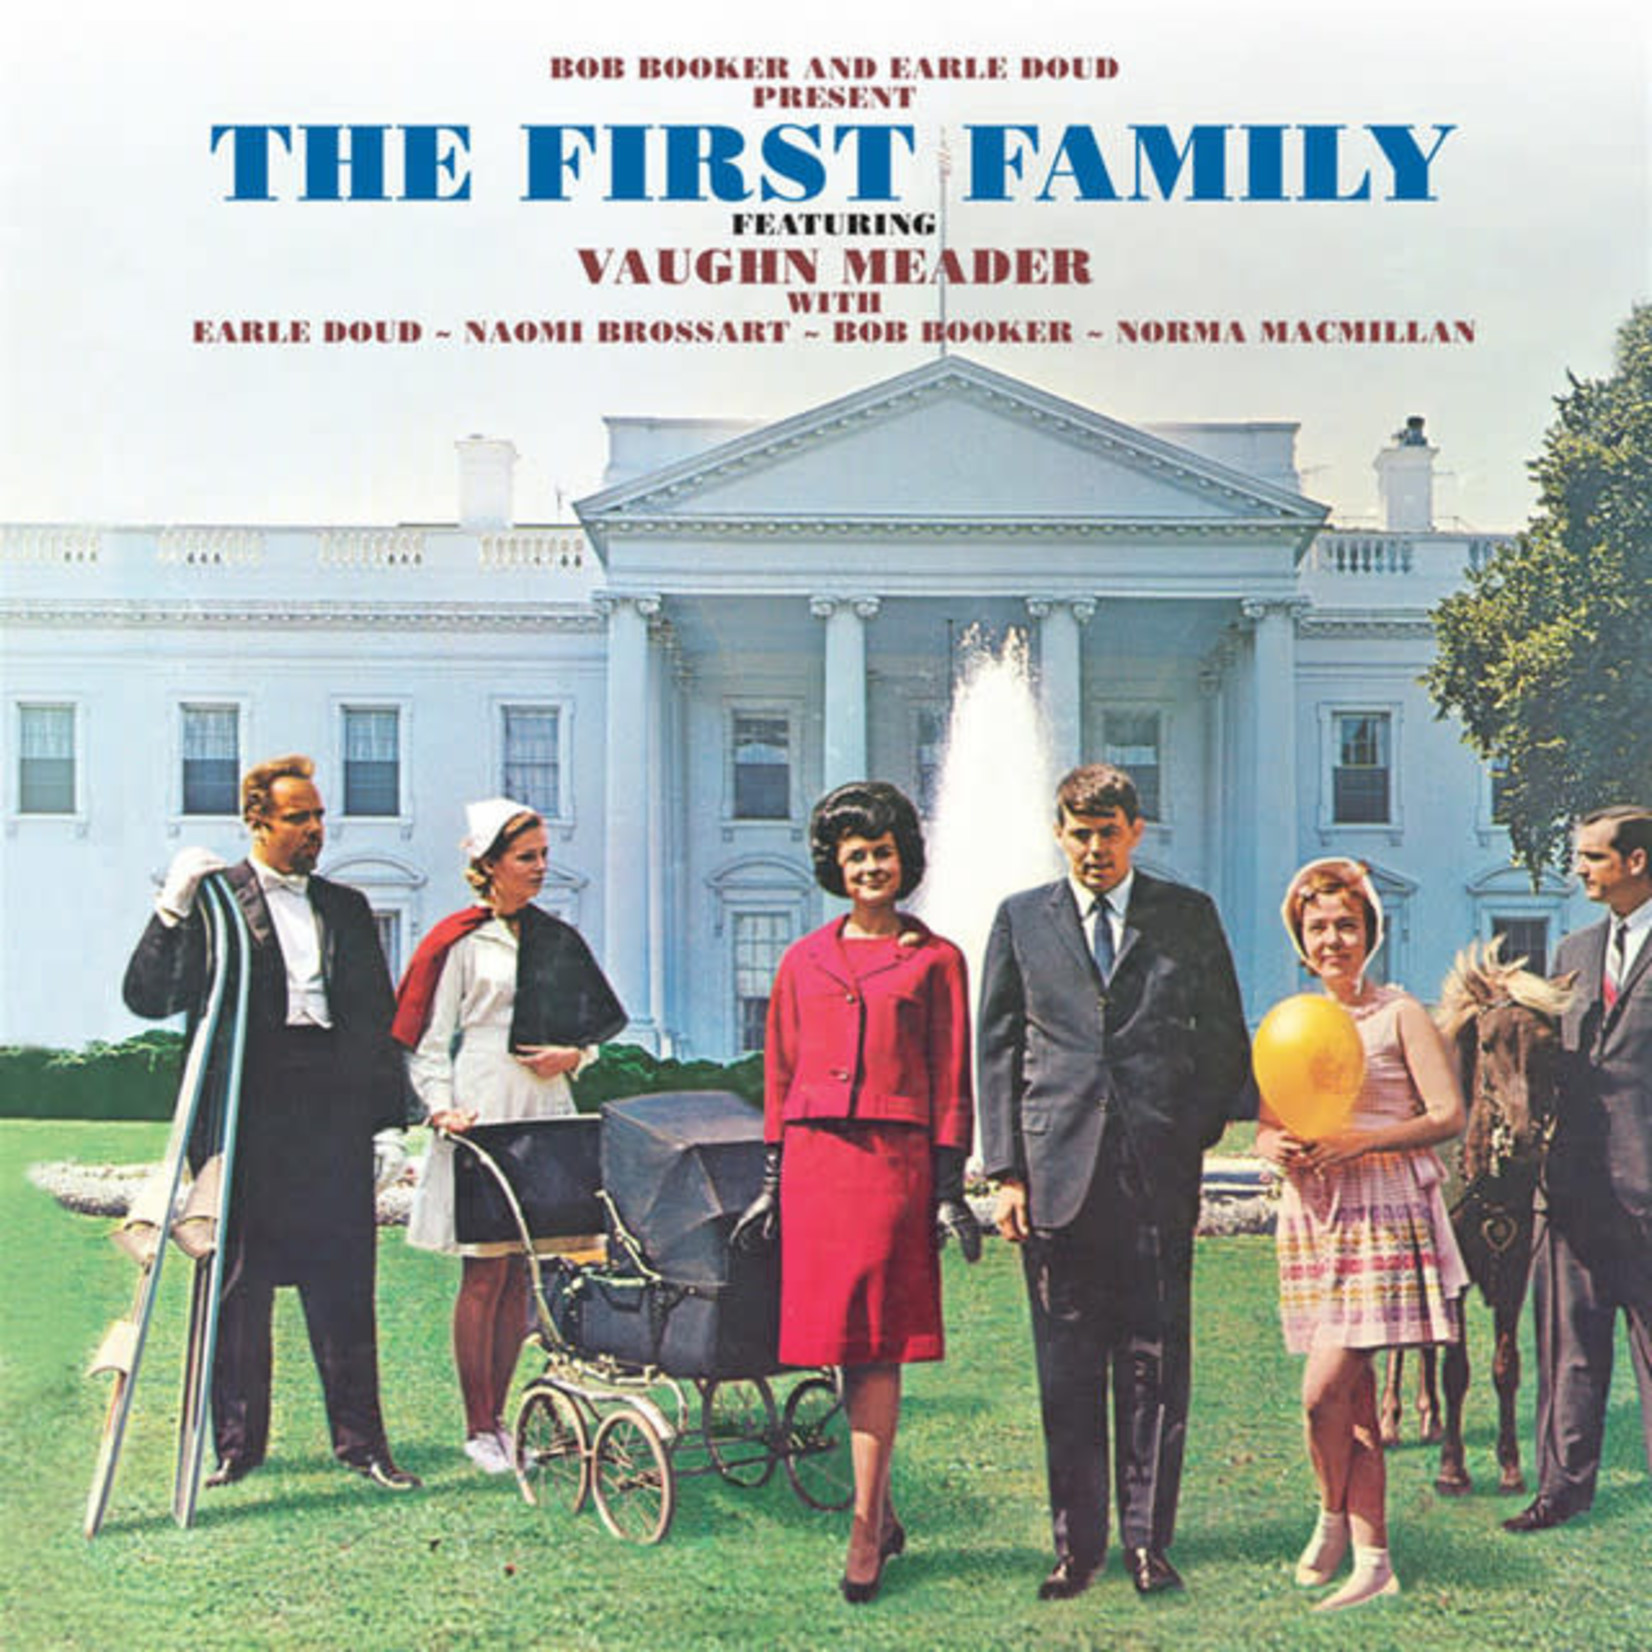 Vaughn Meader - The First Family (Comedy)